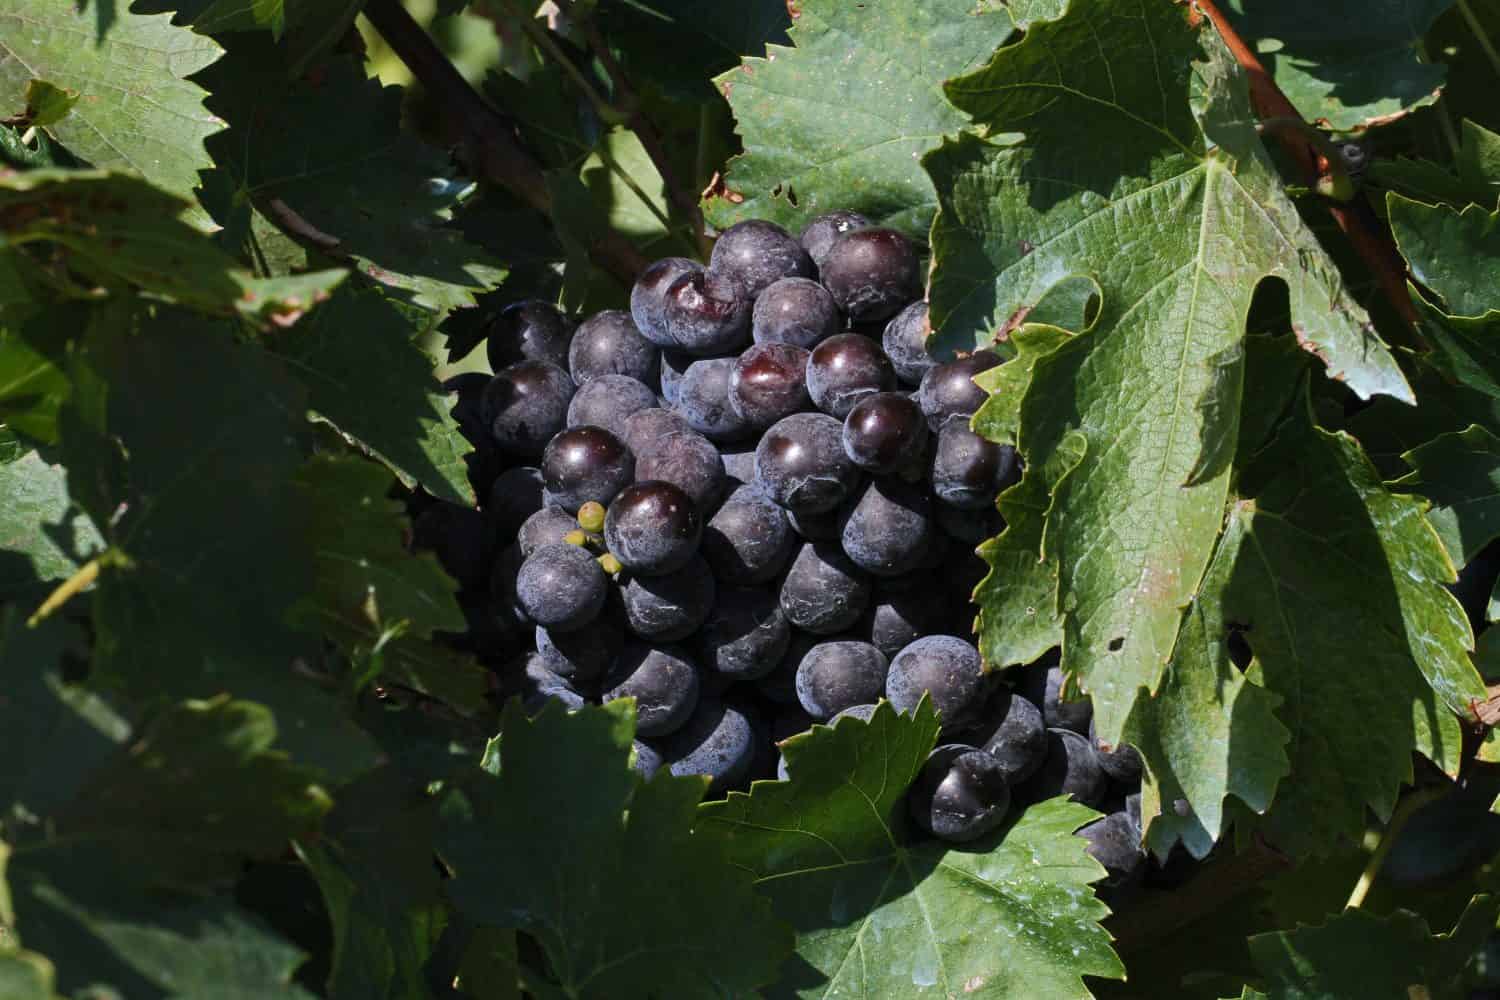 black or noir cynthiana or norton grapes ripening on the vine in late summer related to vitis aestivalis native to Richmond Virginia USA and state symbol of Missouri and Arkansas